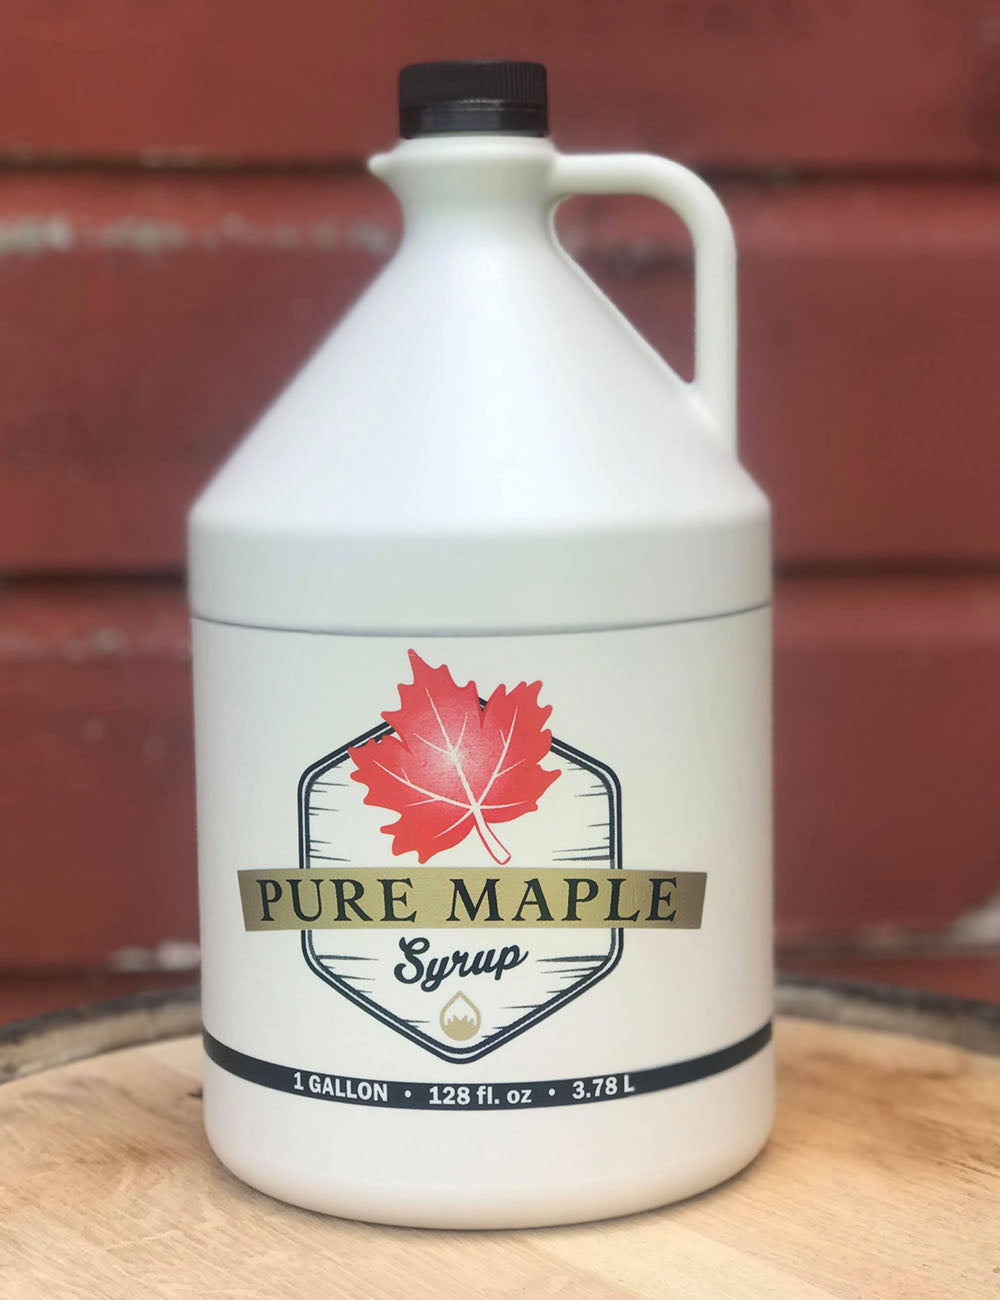 Gallon of Maple Syrup